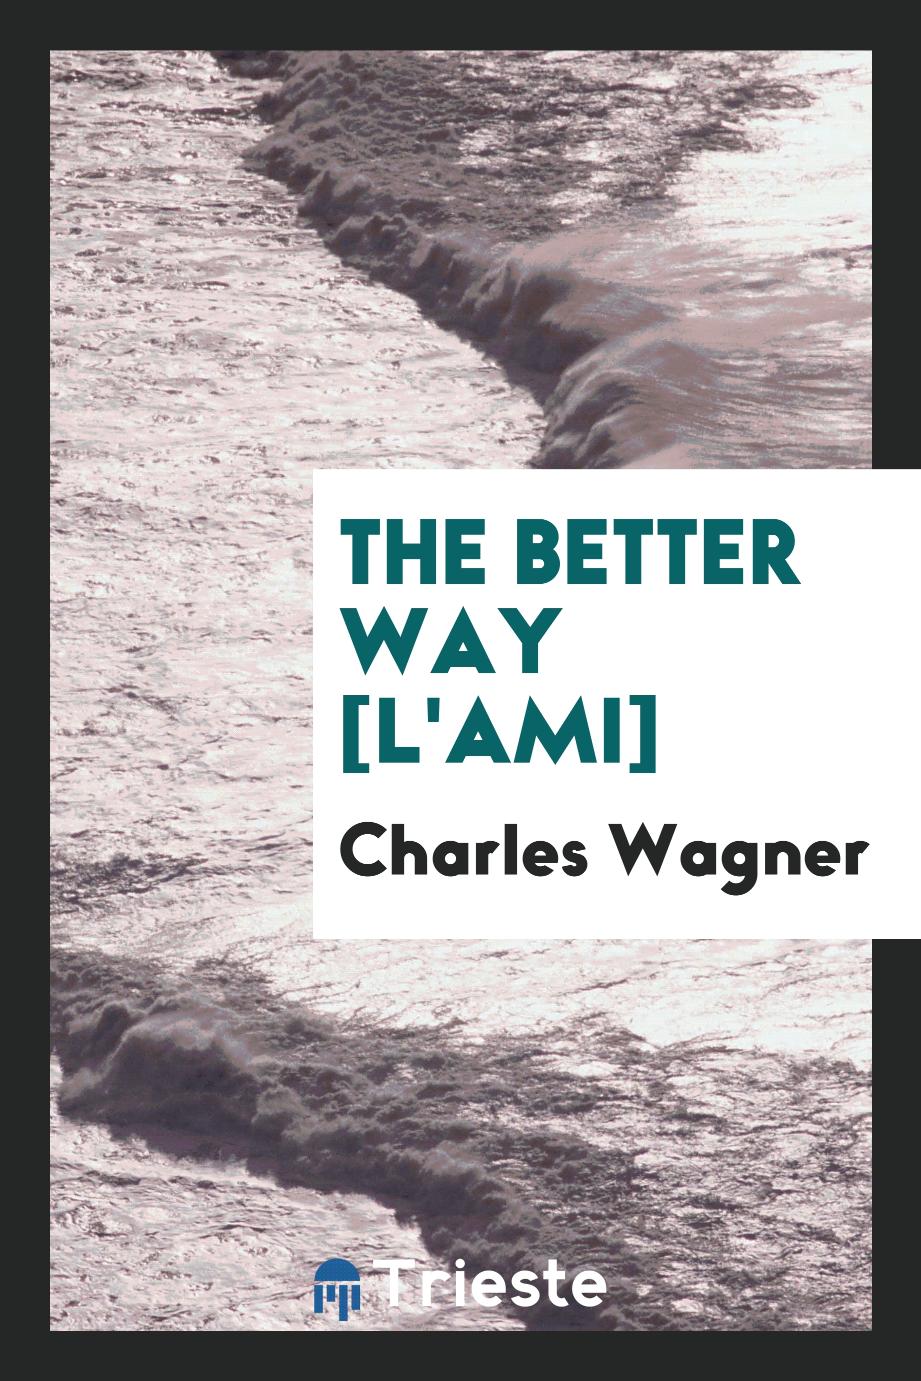 The better way [L'ami]